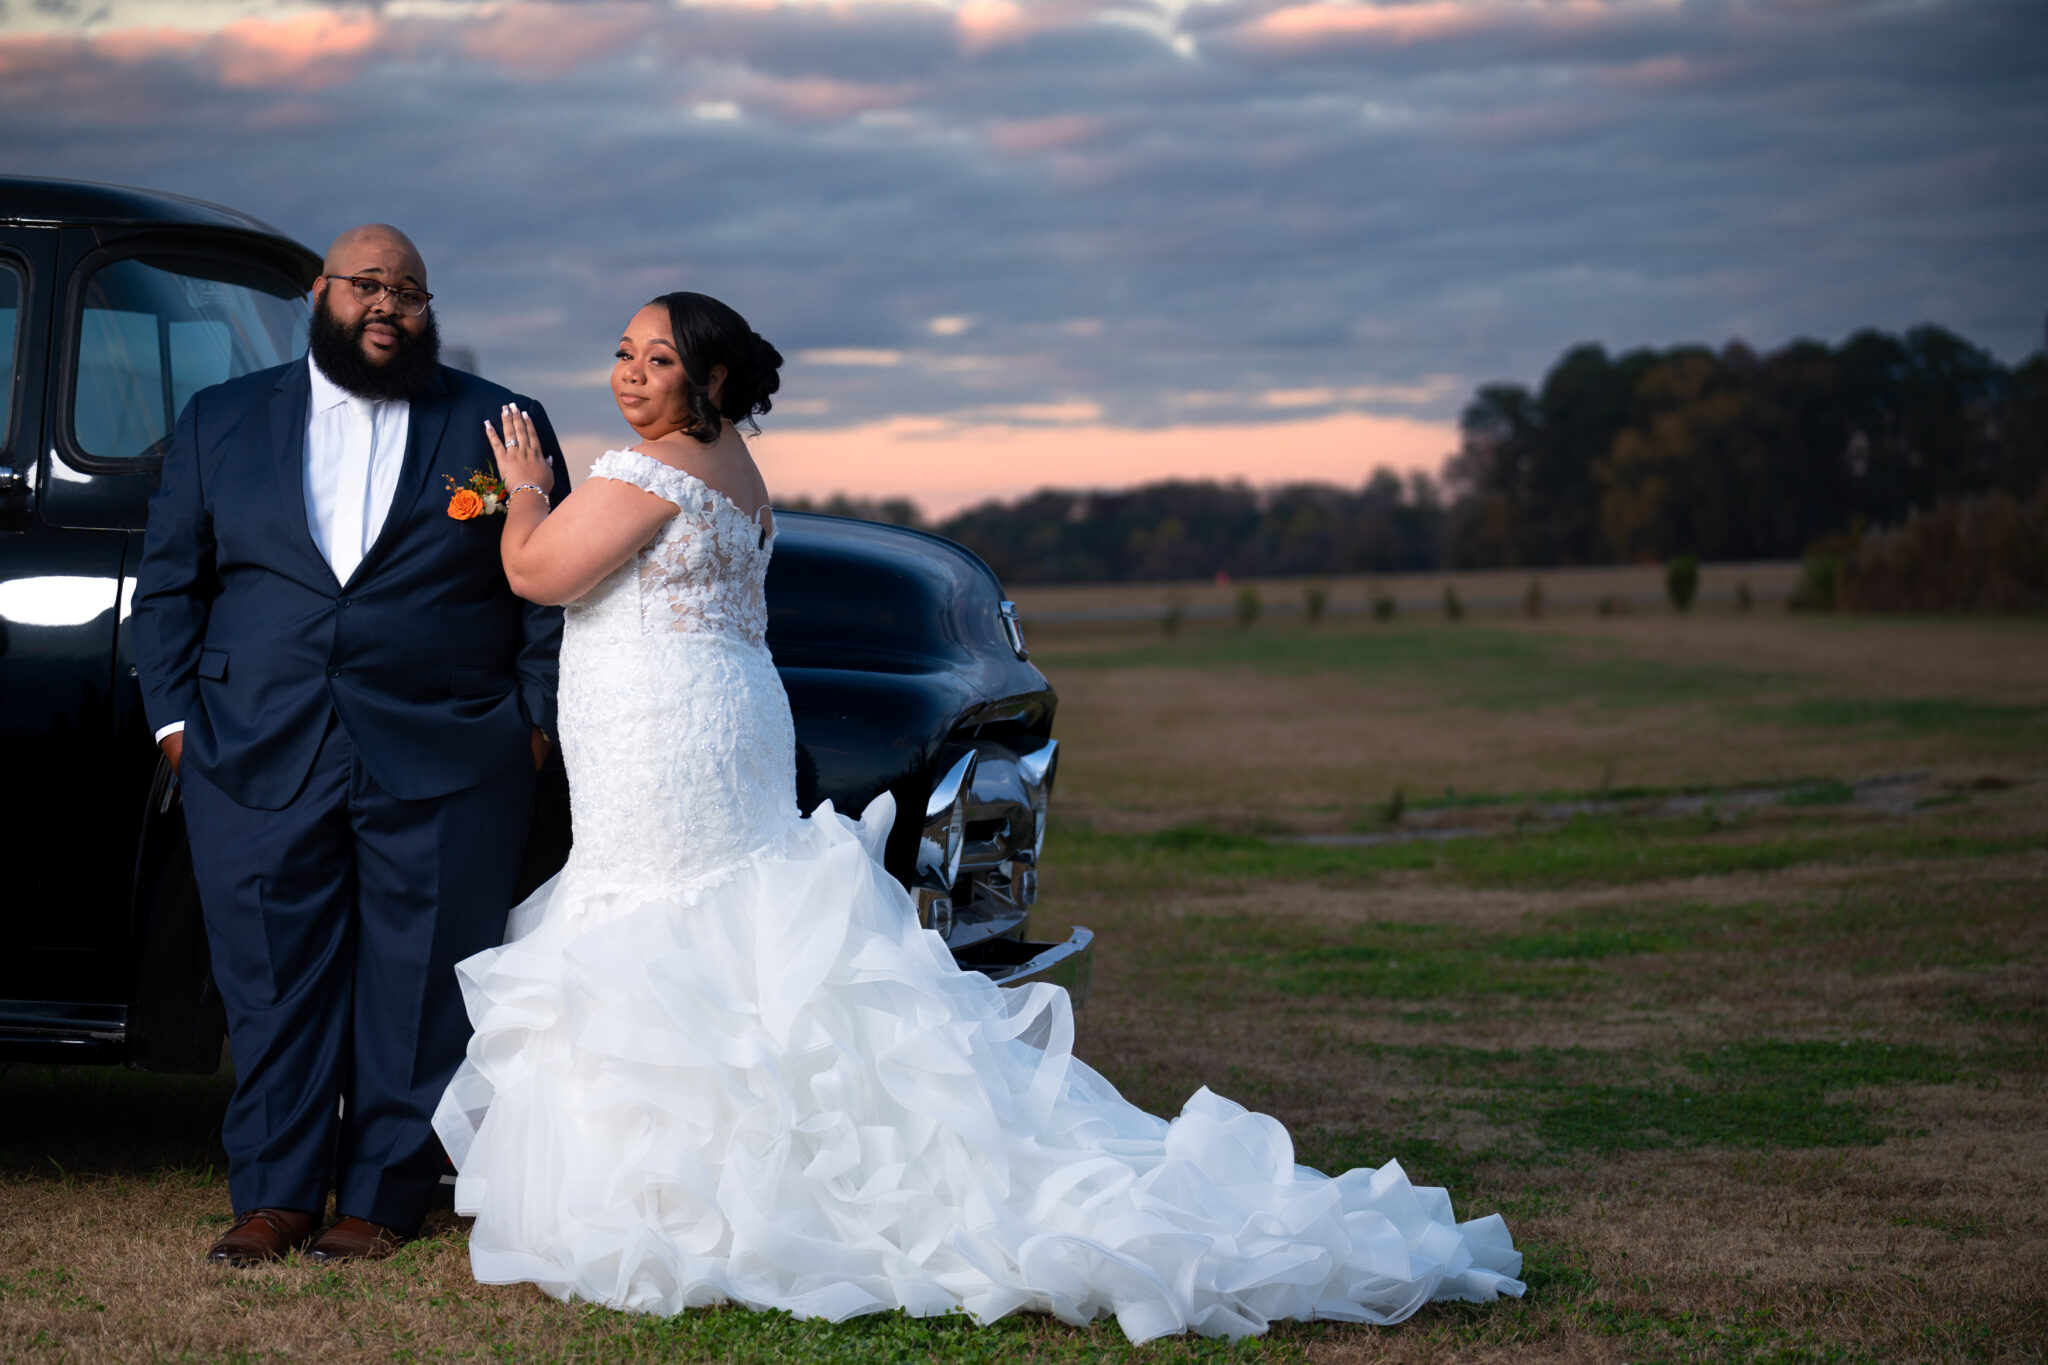 bride and groom at the cotton barn outdoors sunset. Wedding photographer & videographer, located in greenville, nc.